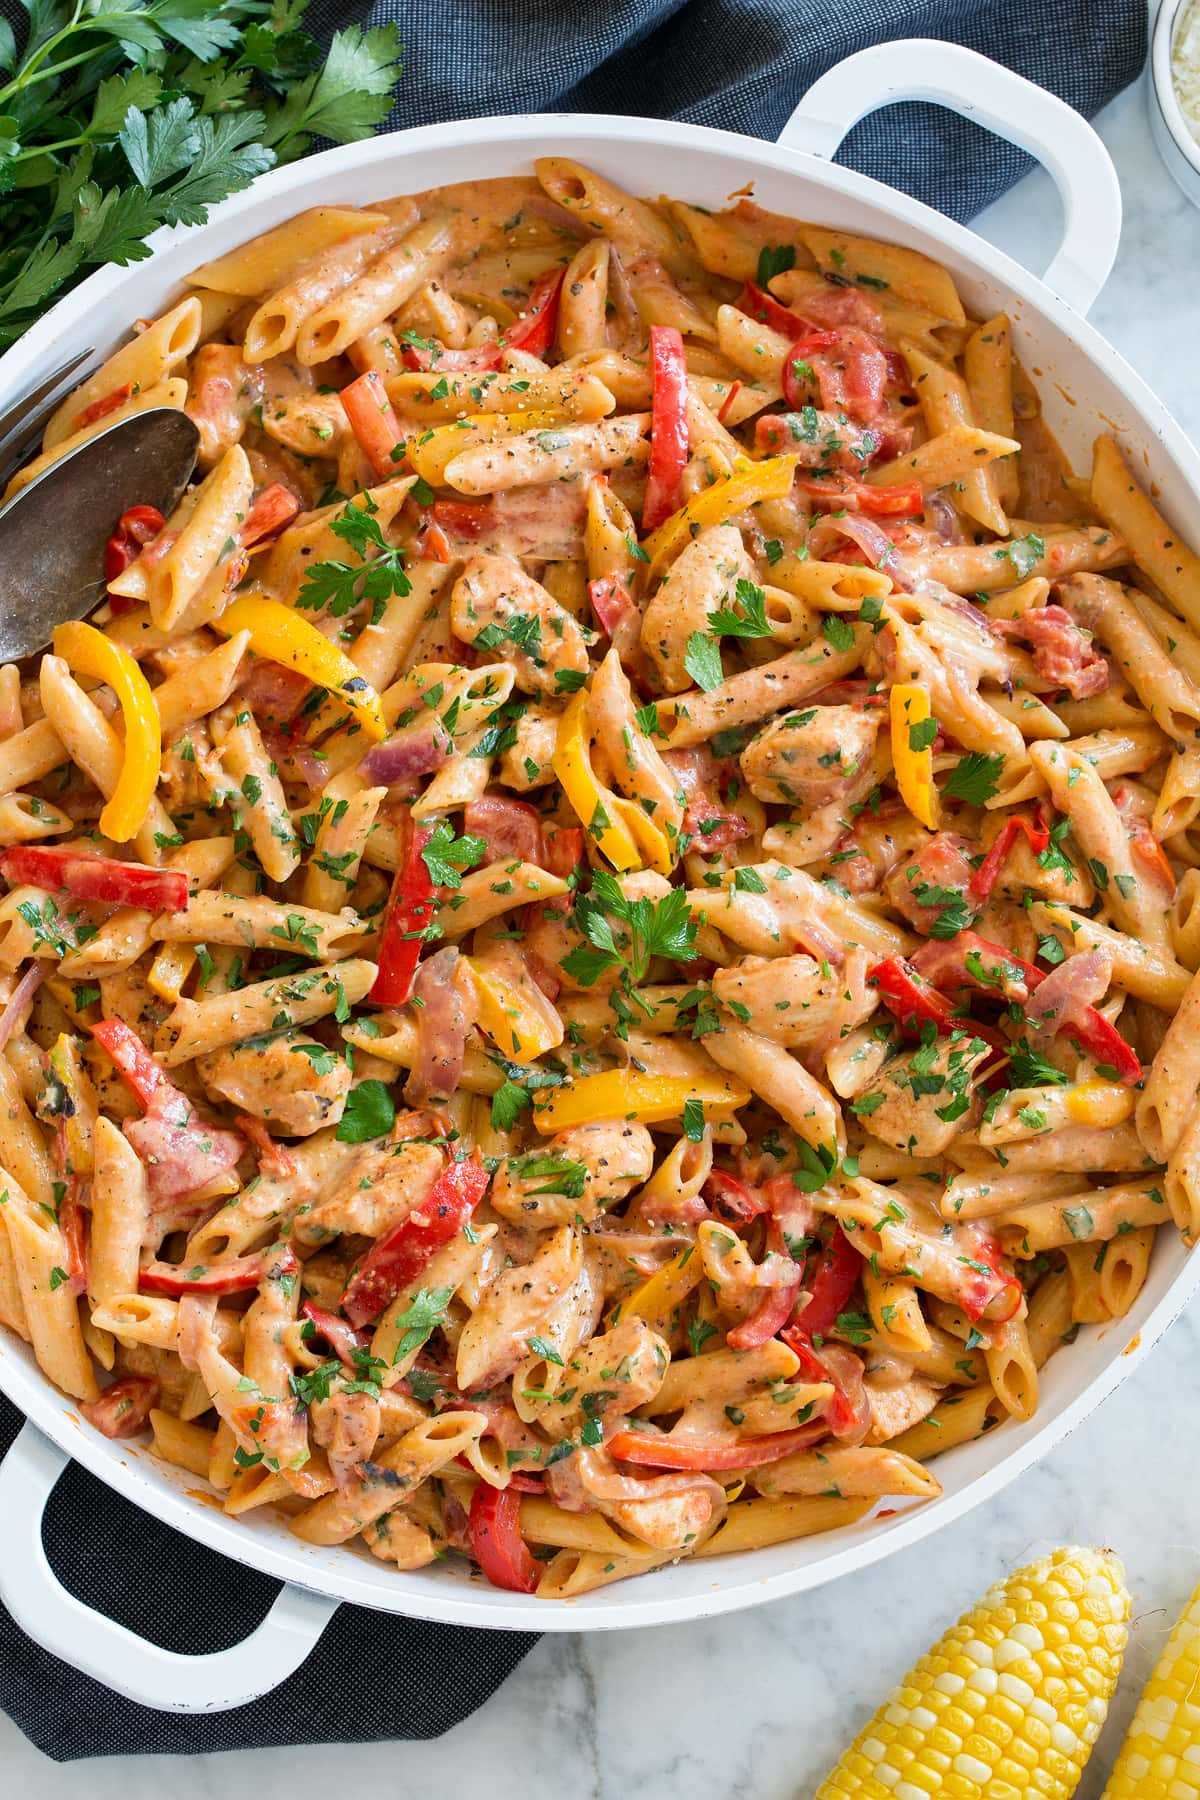 Photo: Creamy cajun chicken pasta shown in a large white pan from overhead.